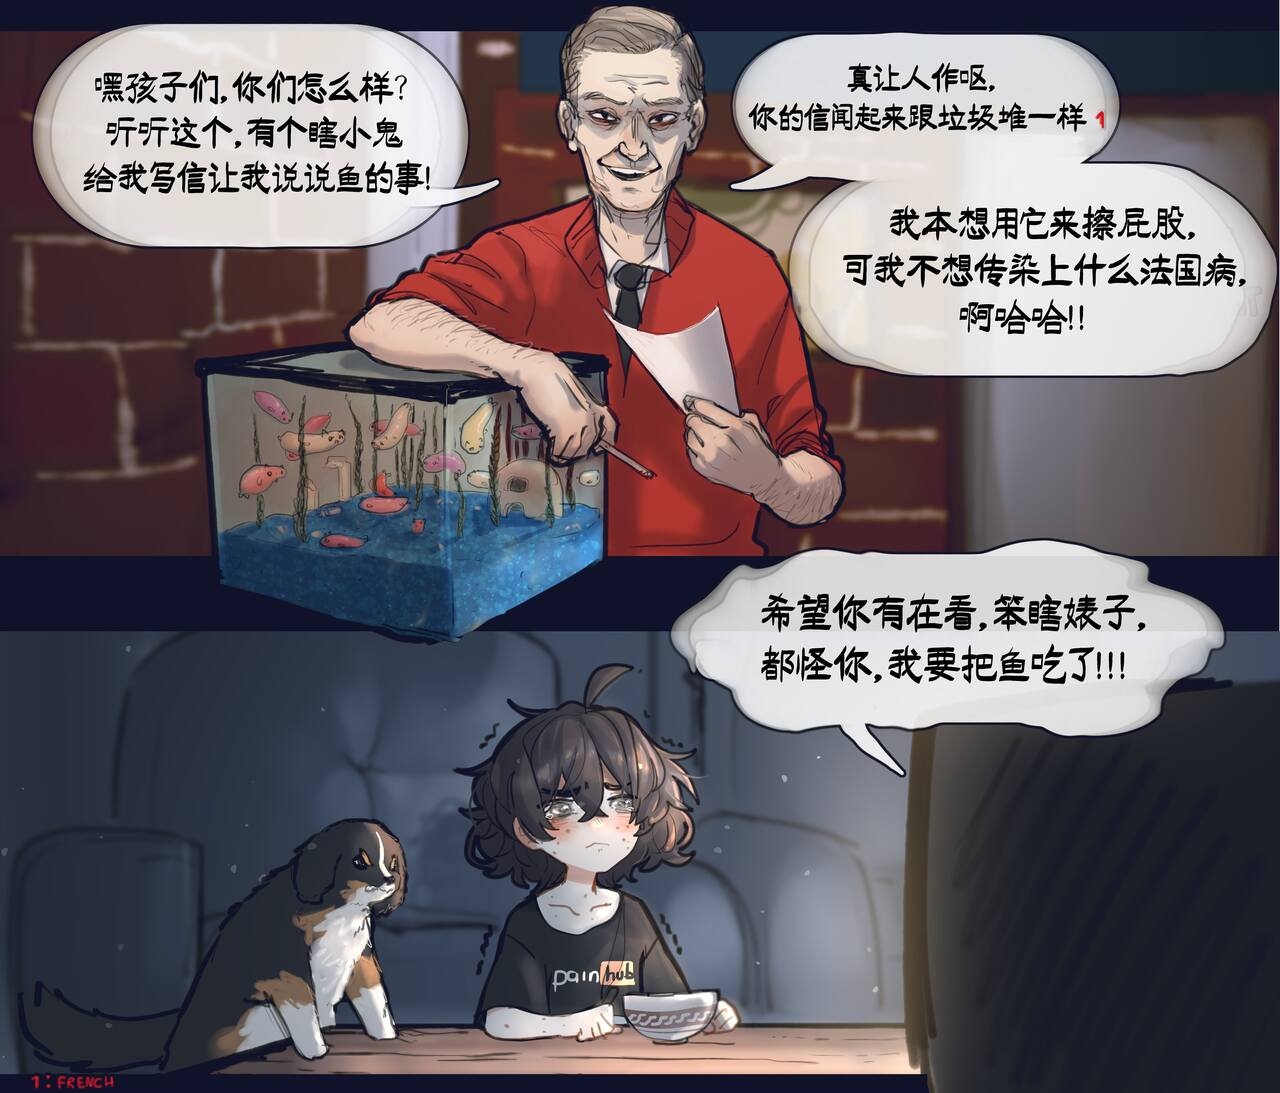 [popopoka] Blind Girl's accident [Chinese] [白杨汉化组] 45